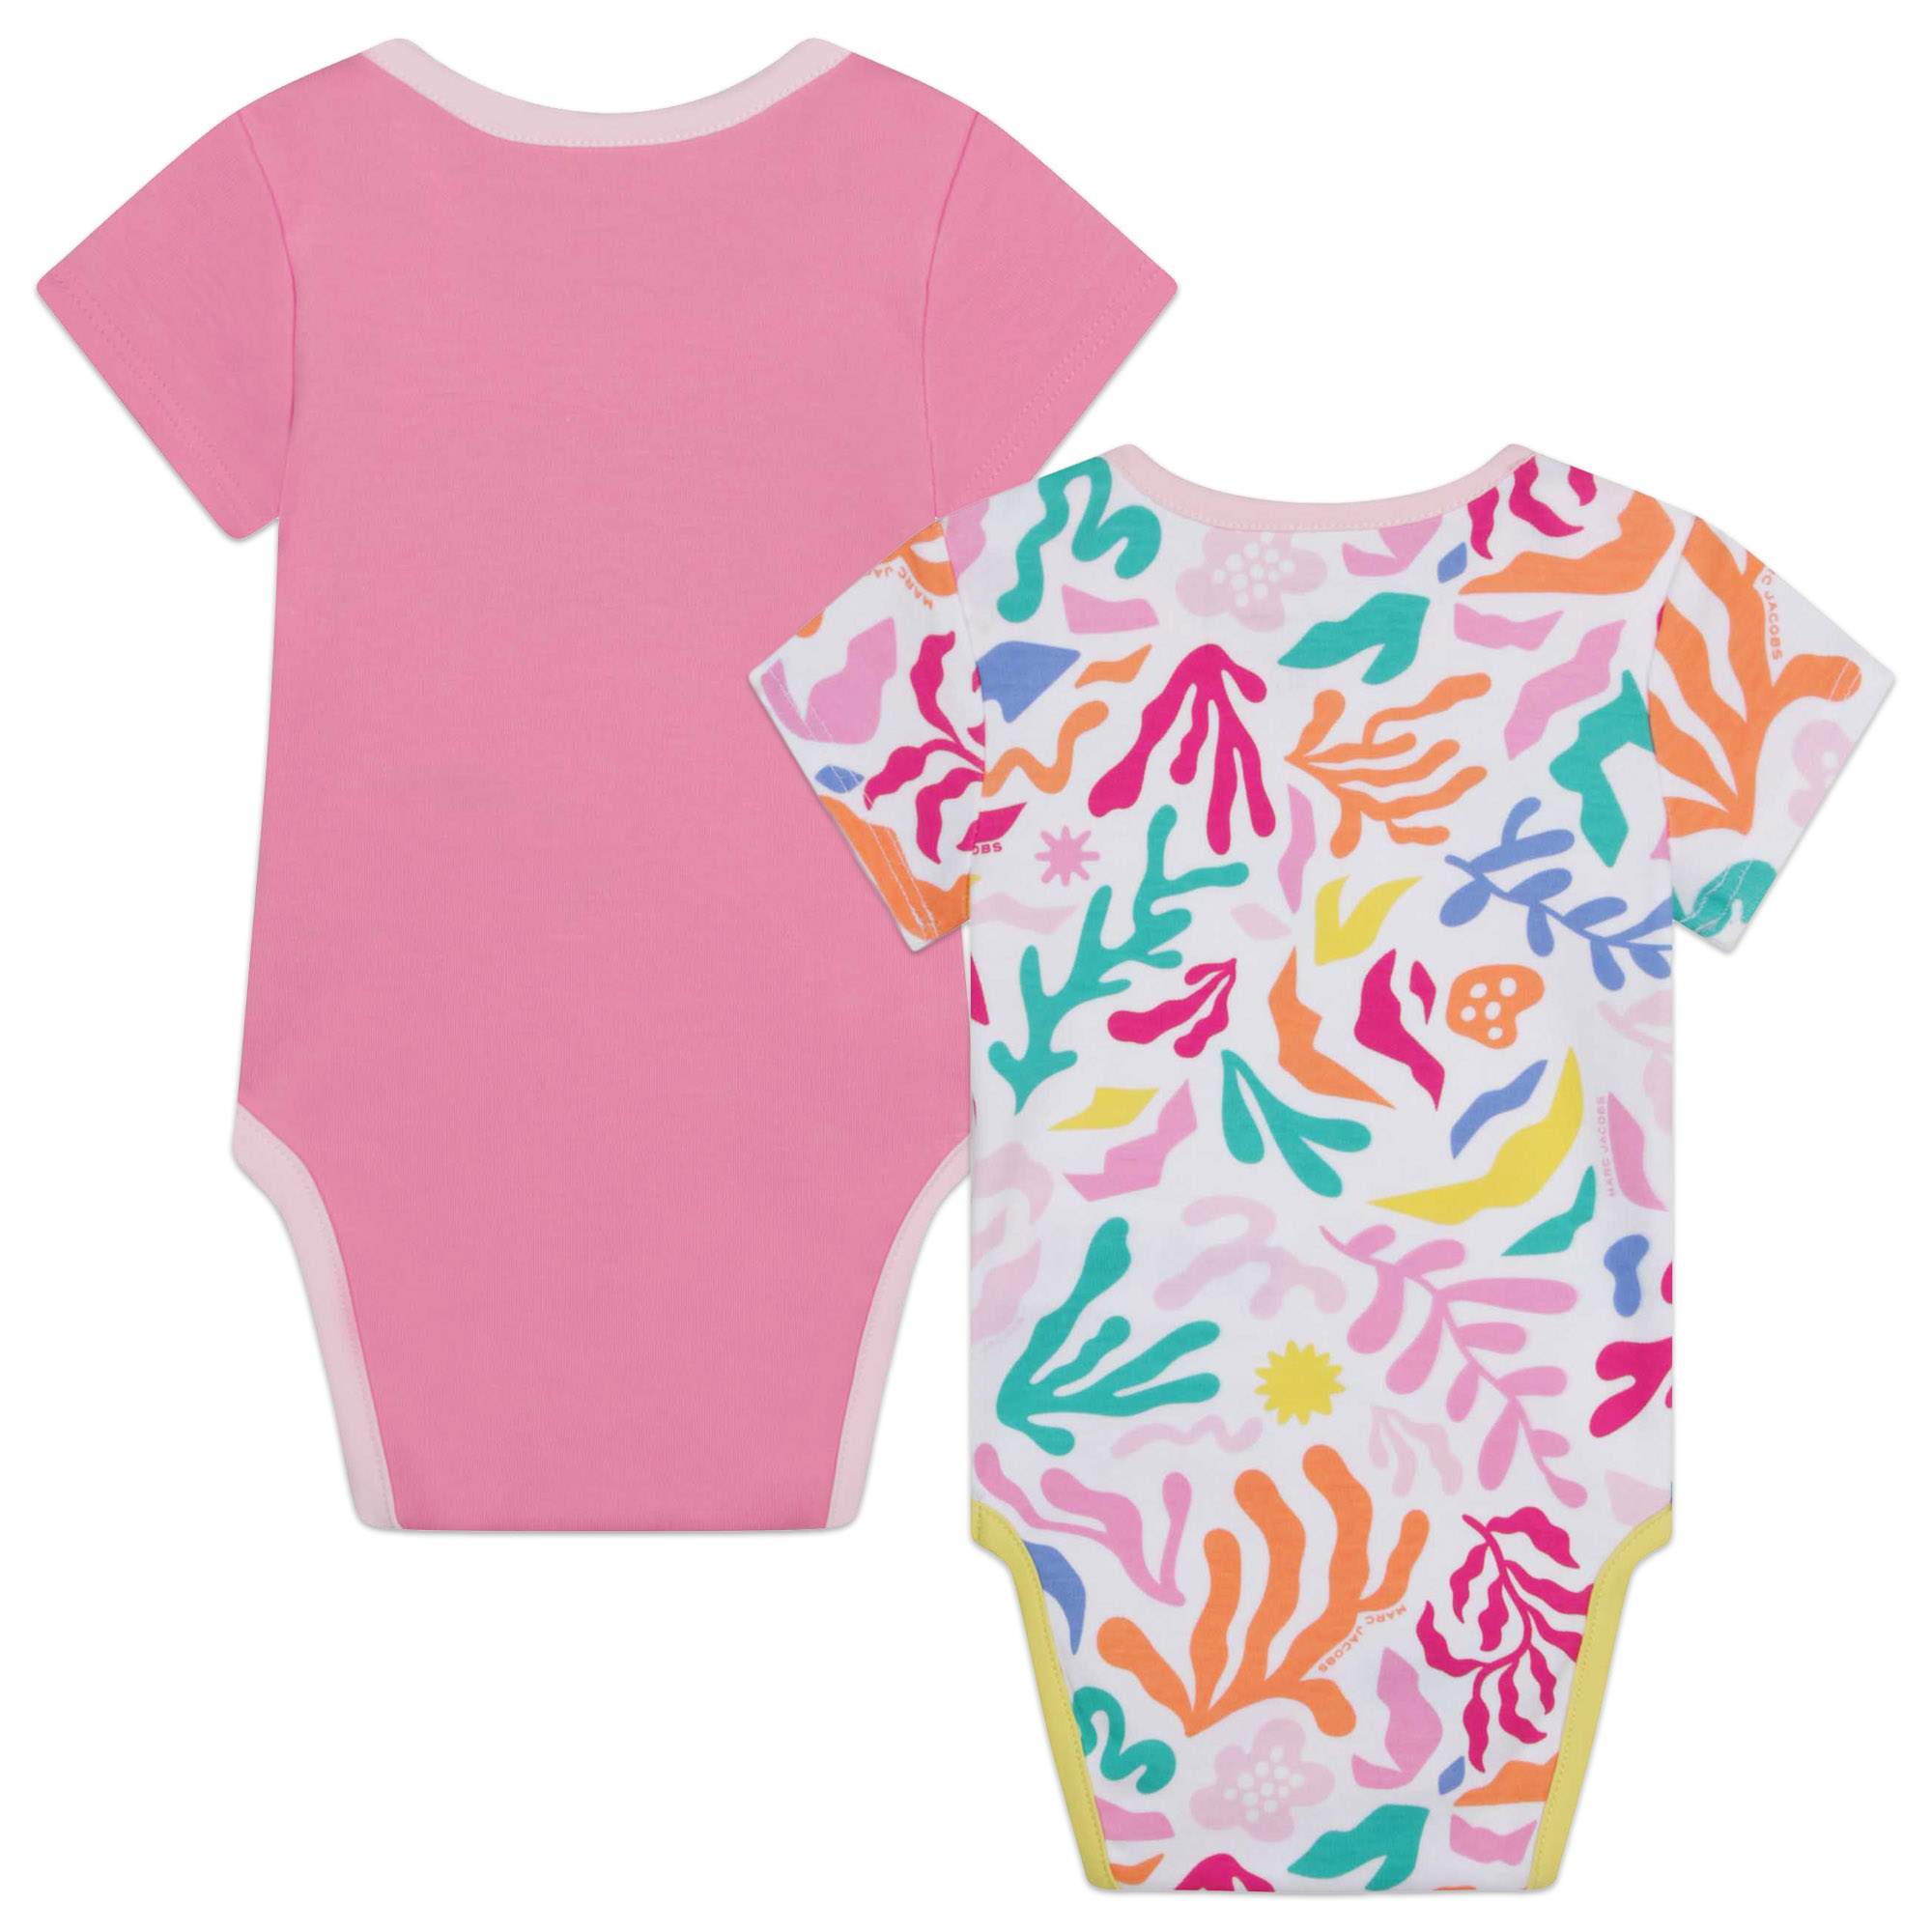 Set of two matching onesies MARC JACOBS for UNISEX